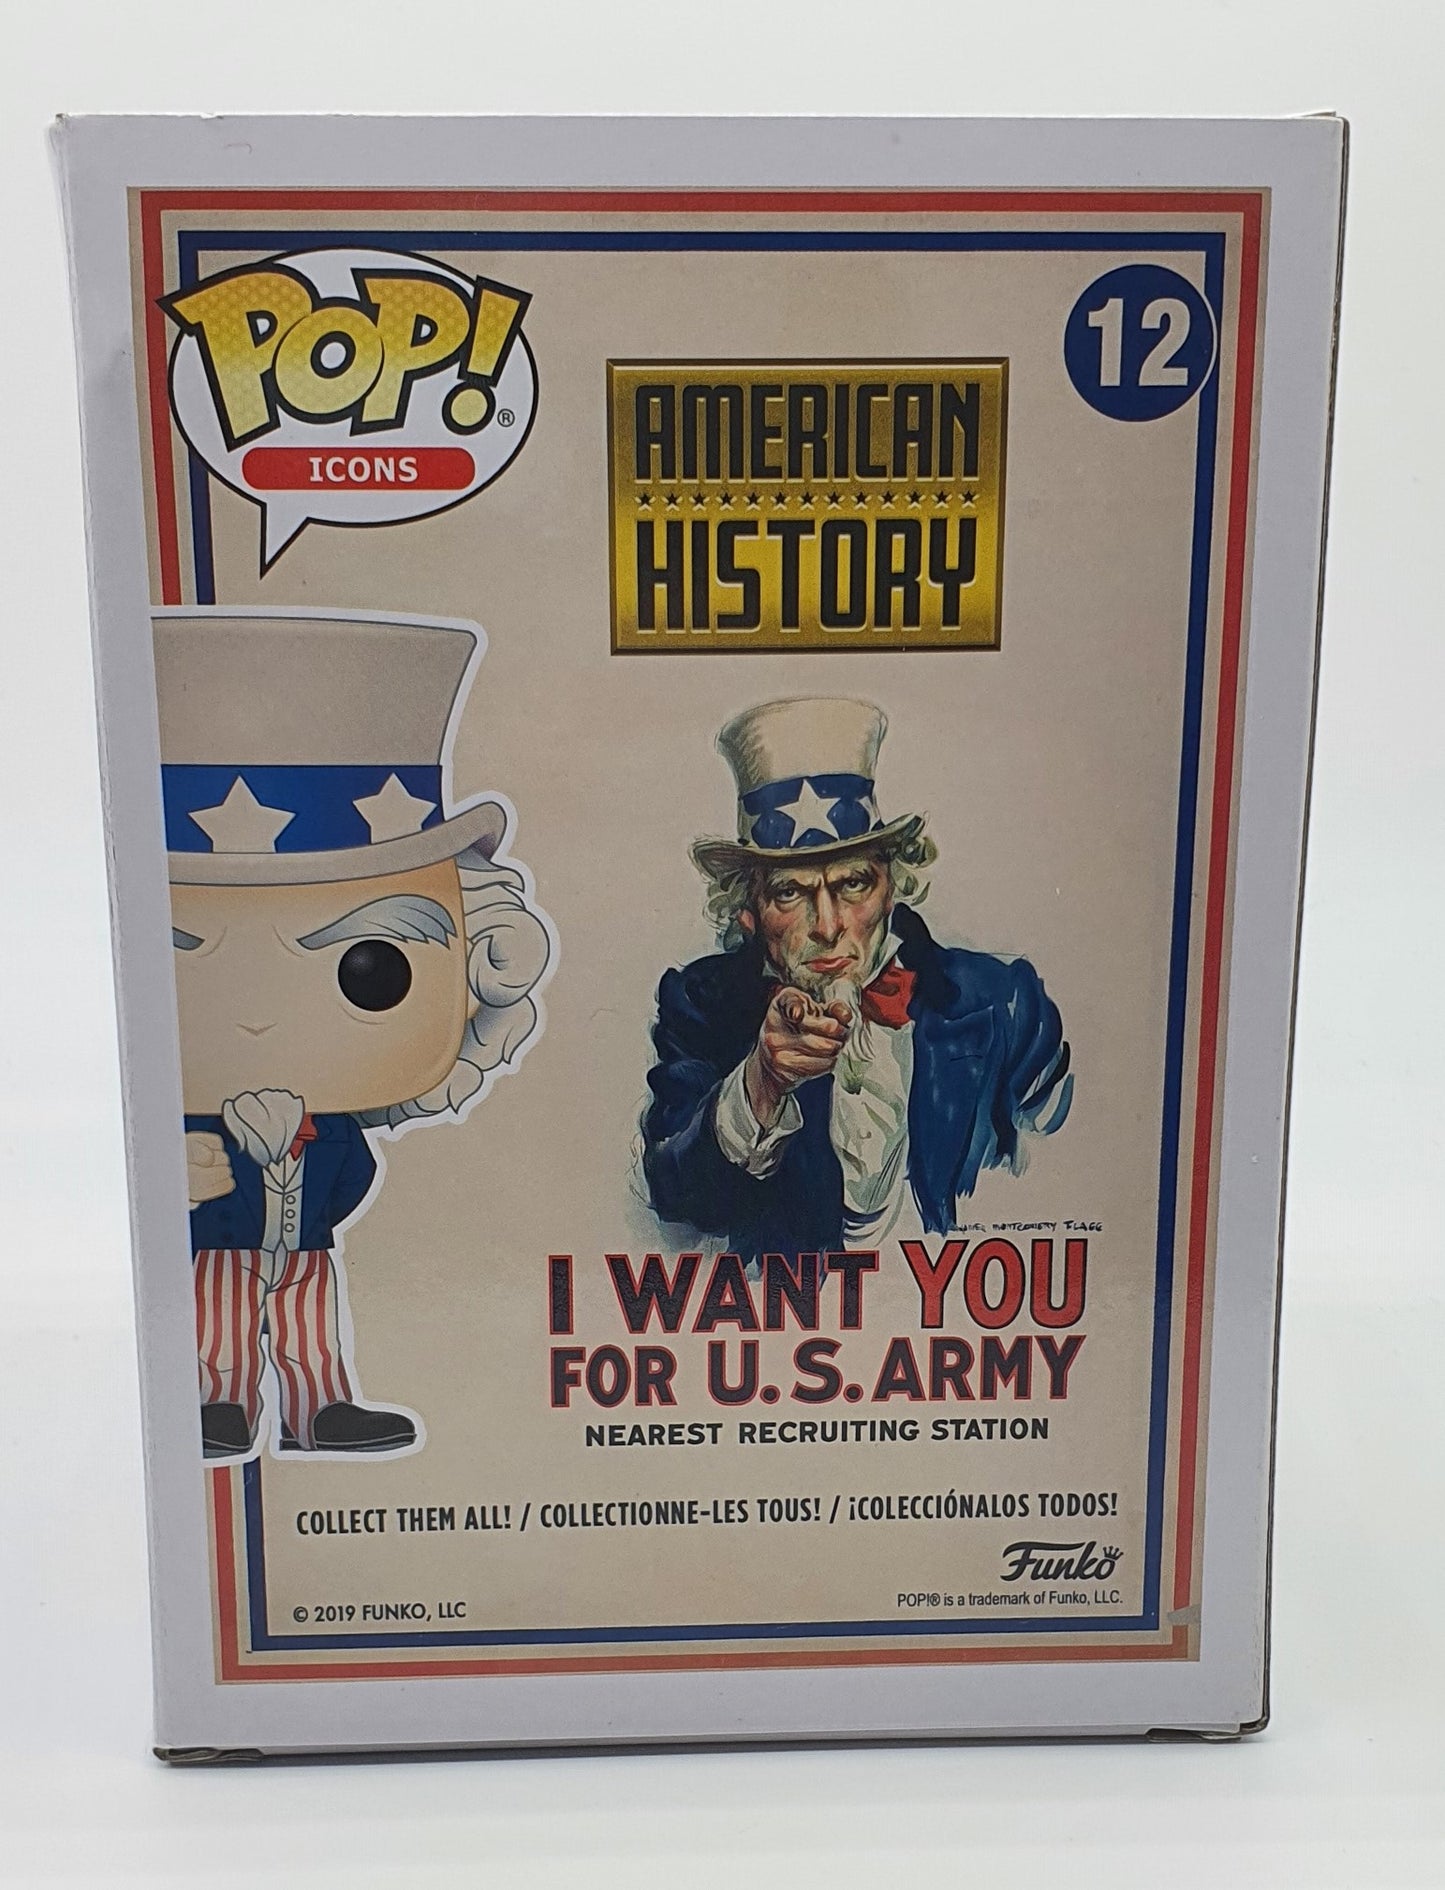 12 - ICONS - AMERICAN HISTORY - UNCLE SAM